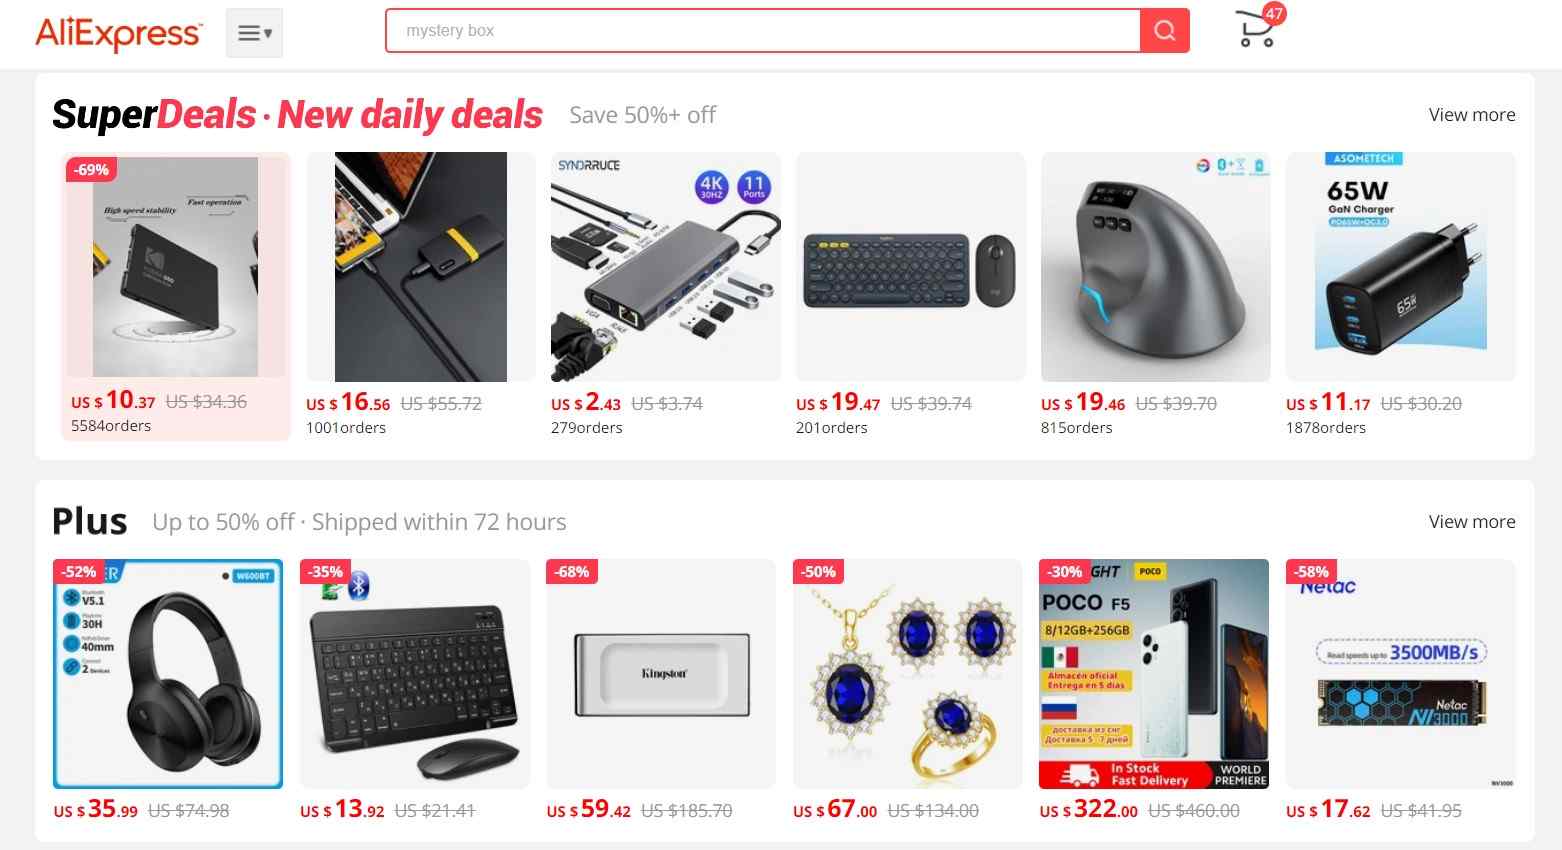 Secrets Revealed: Meet the Best AliExpress Sellers You Need to Know